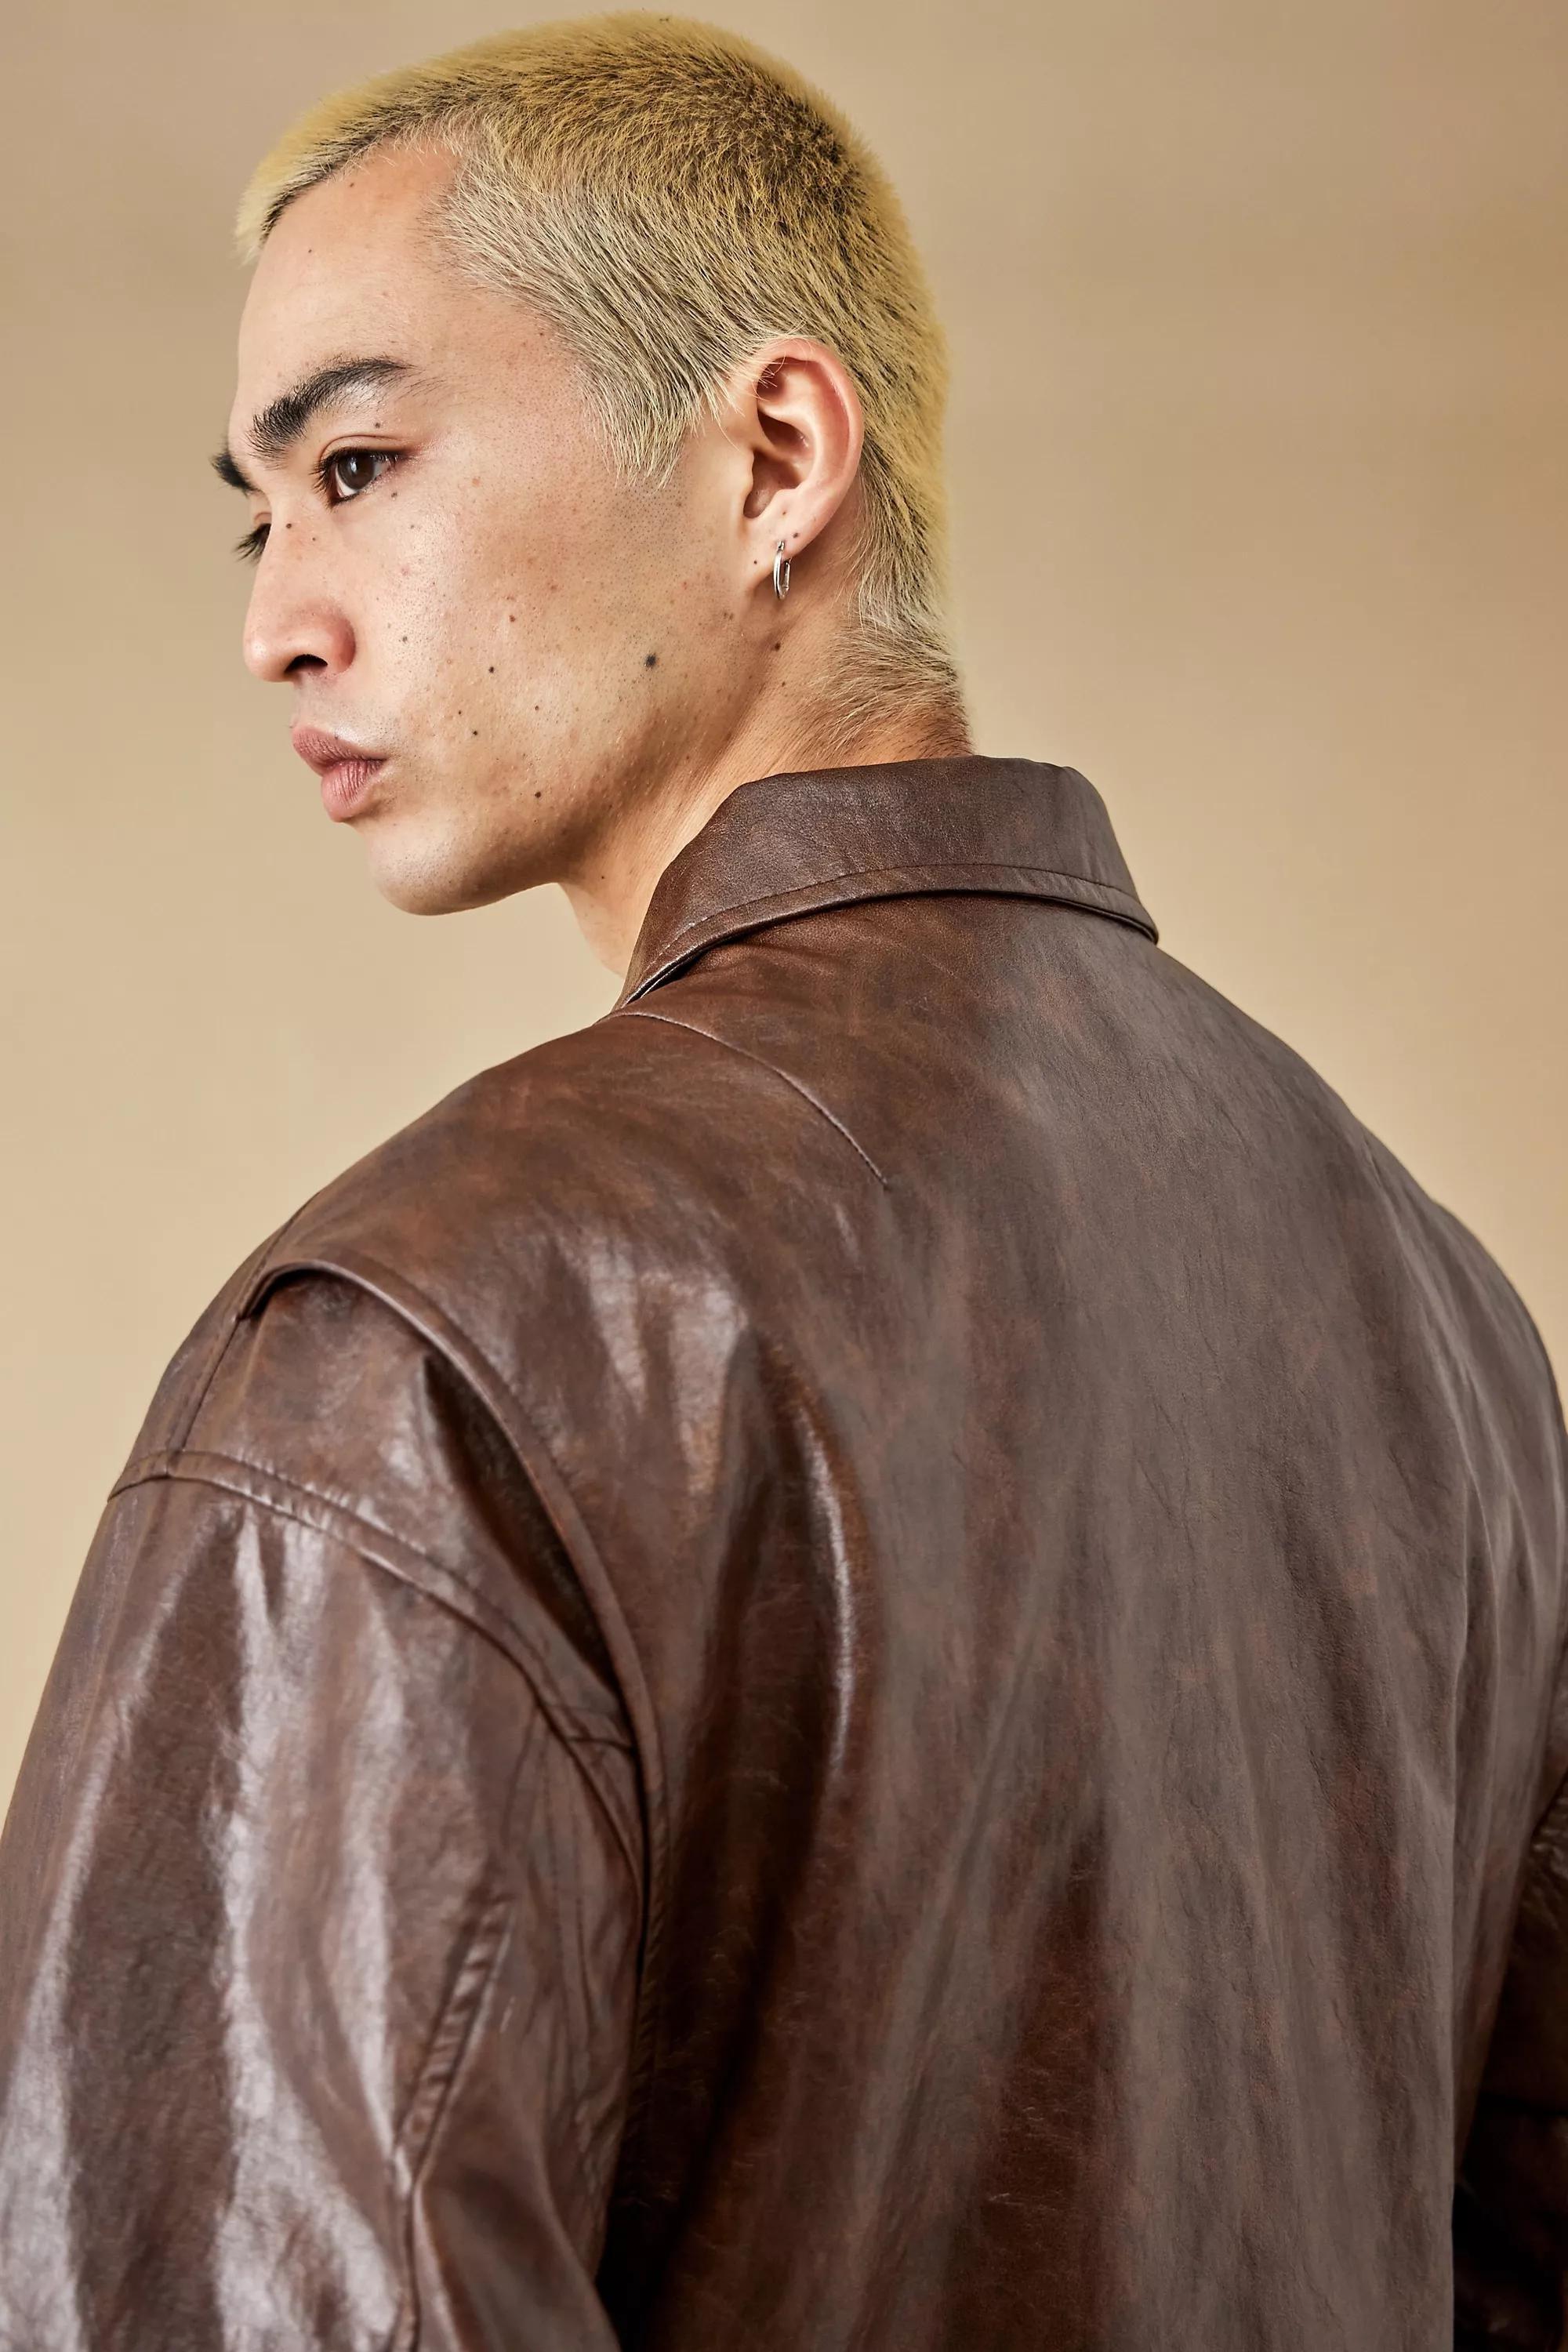 Urban Outfitters - Brown Flight Jacket